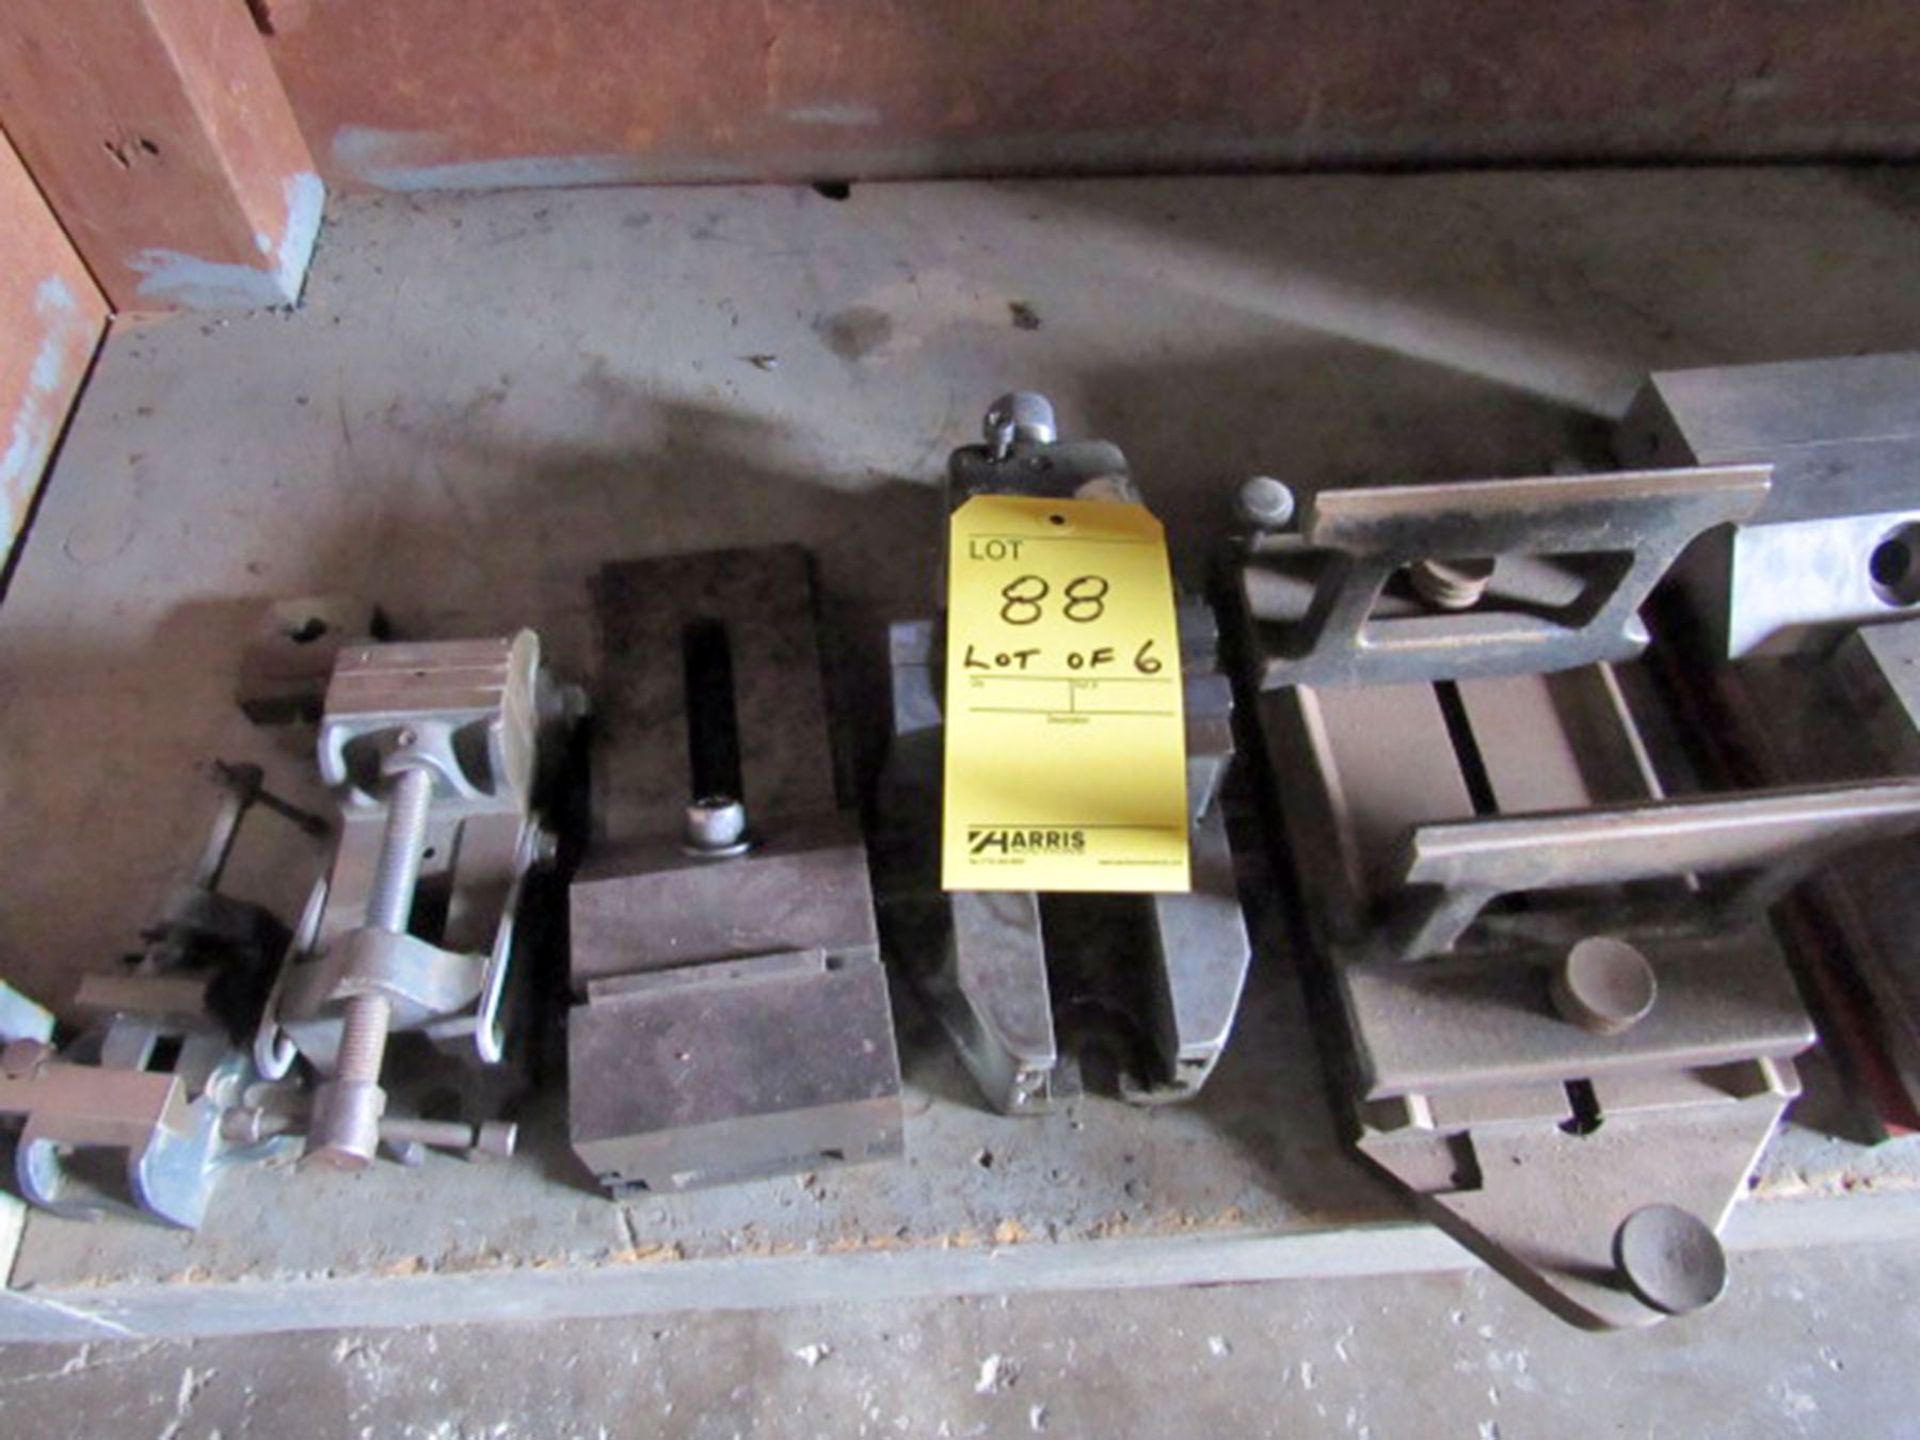 Lot of 6 Small Vises - Image 3 of 3